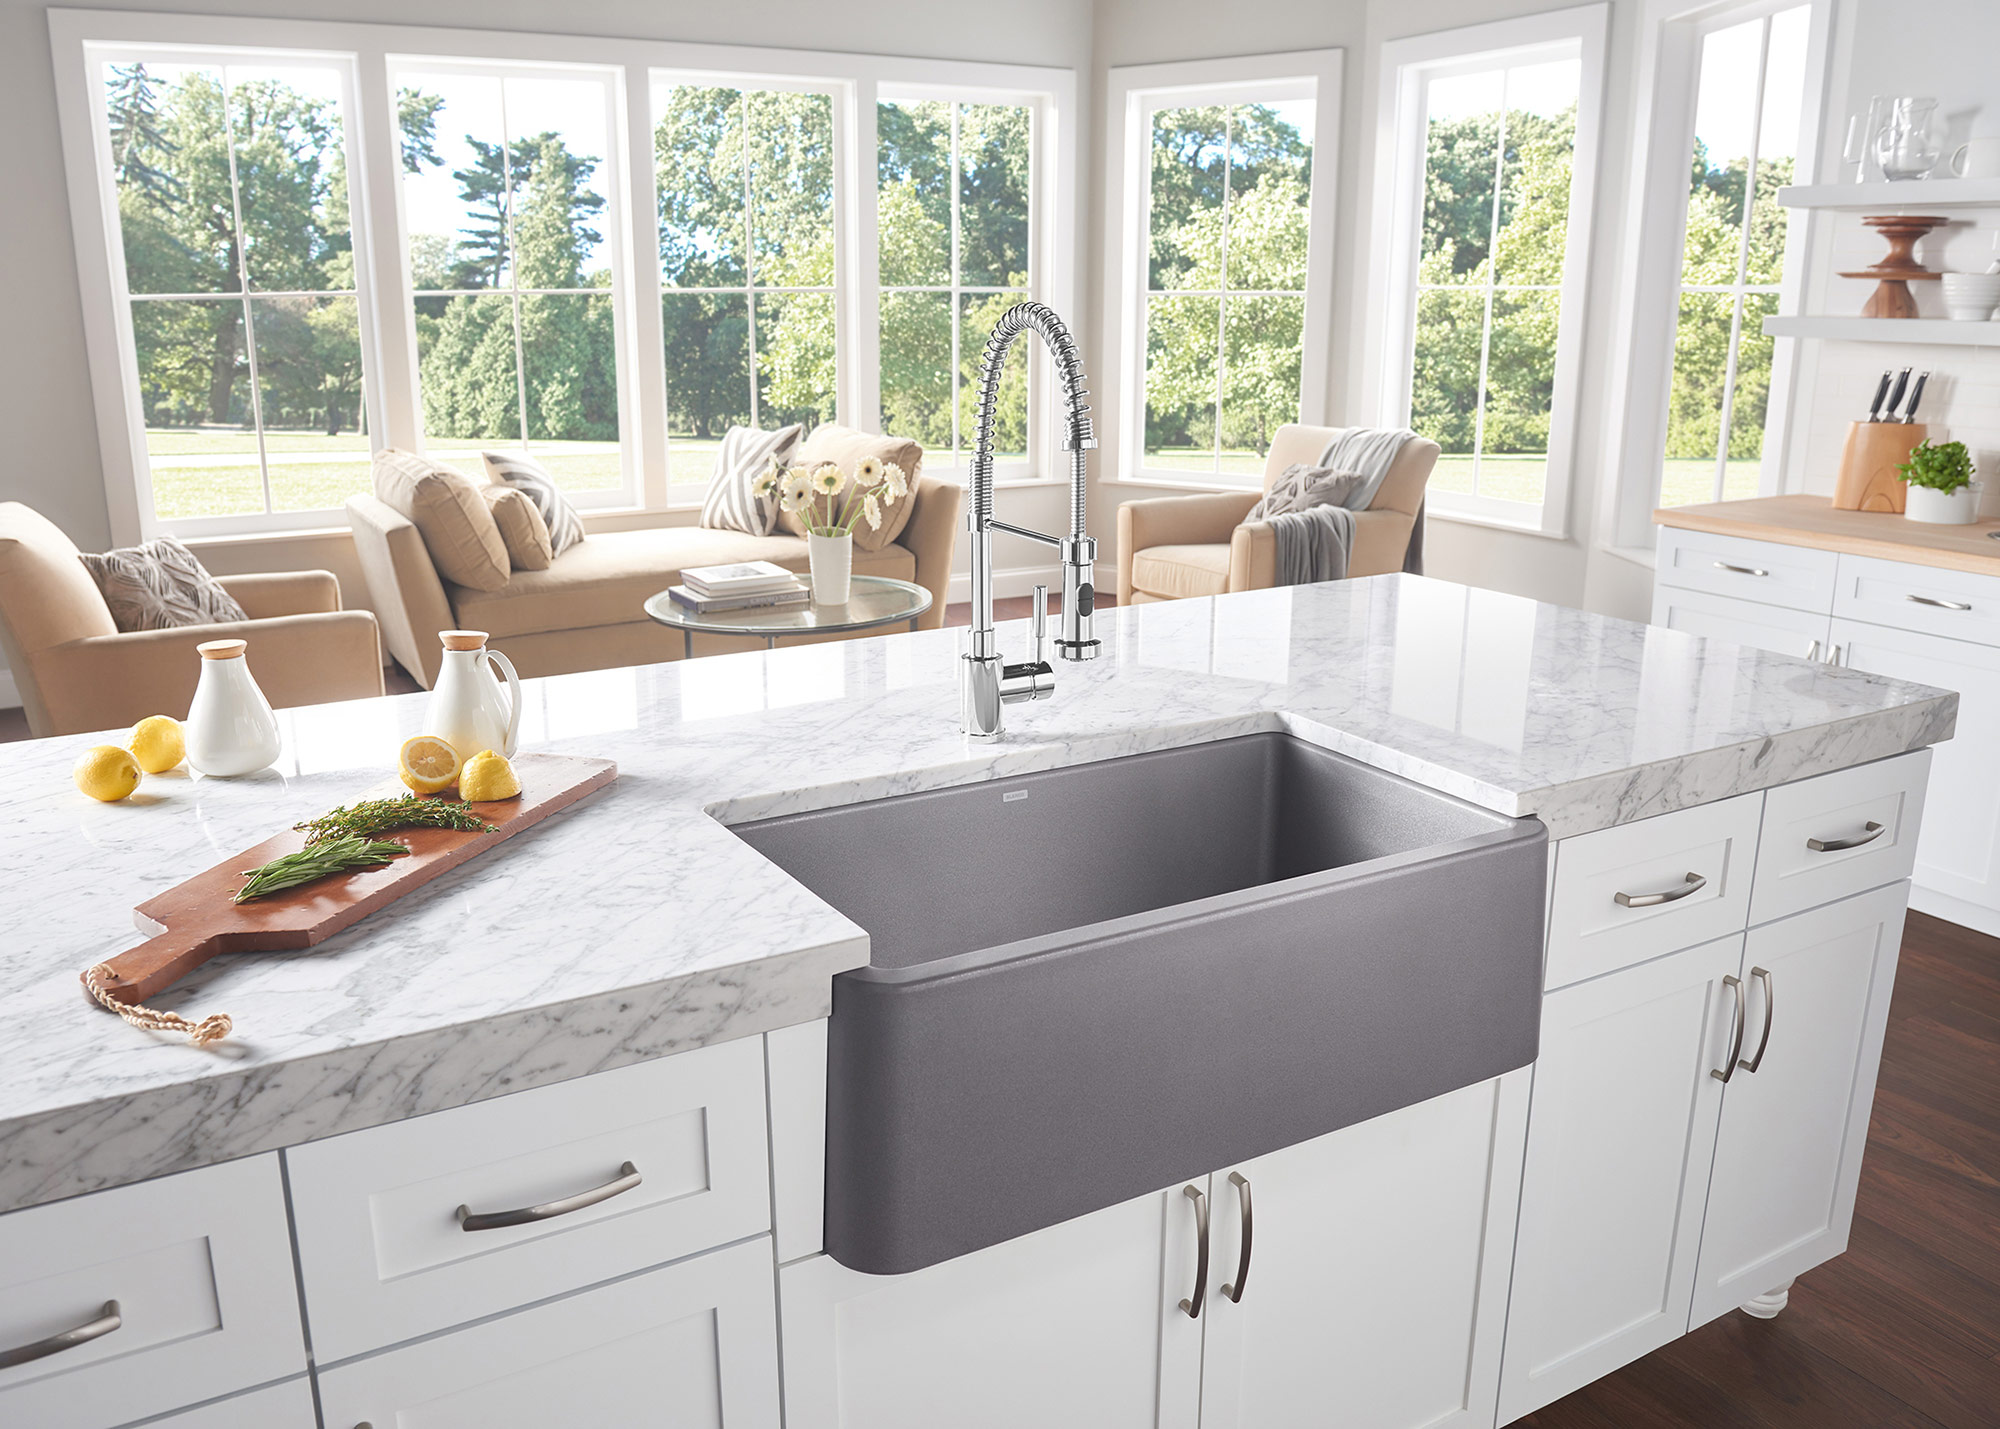 The Apron Front Sink A Transitional Country Design Style